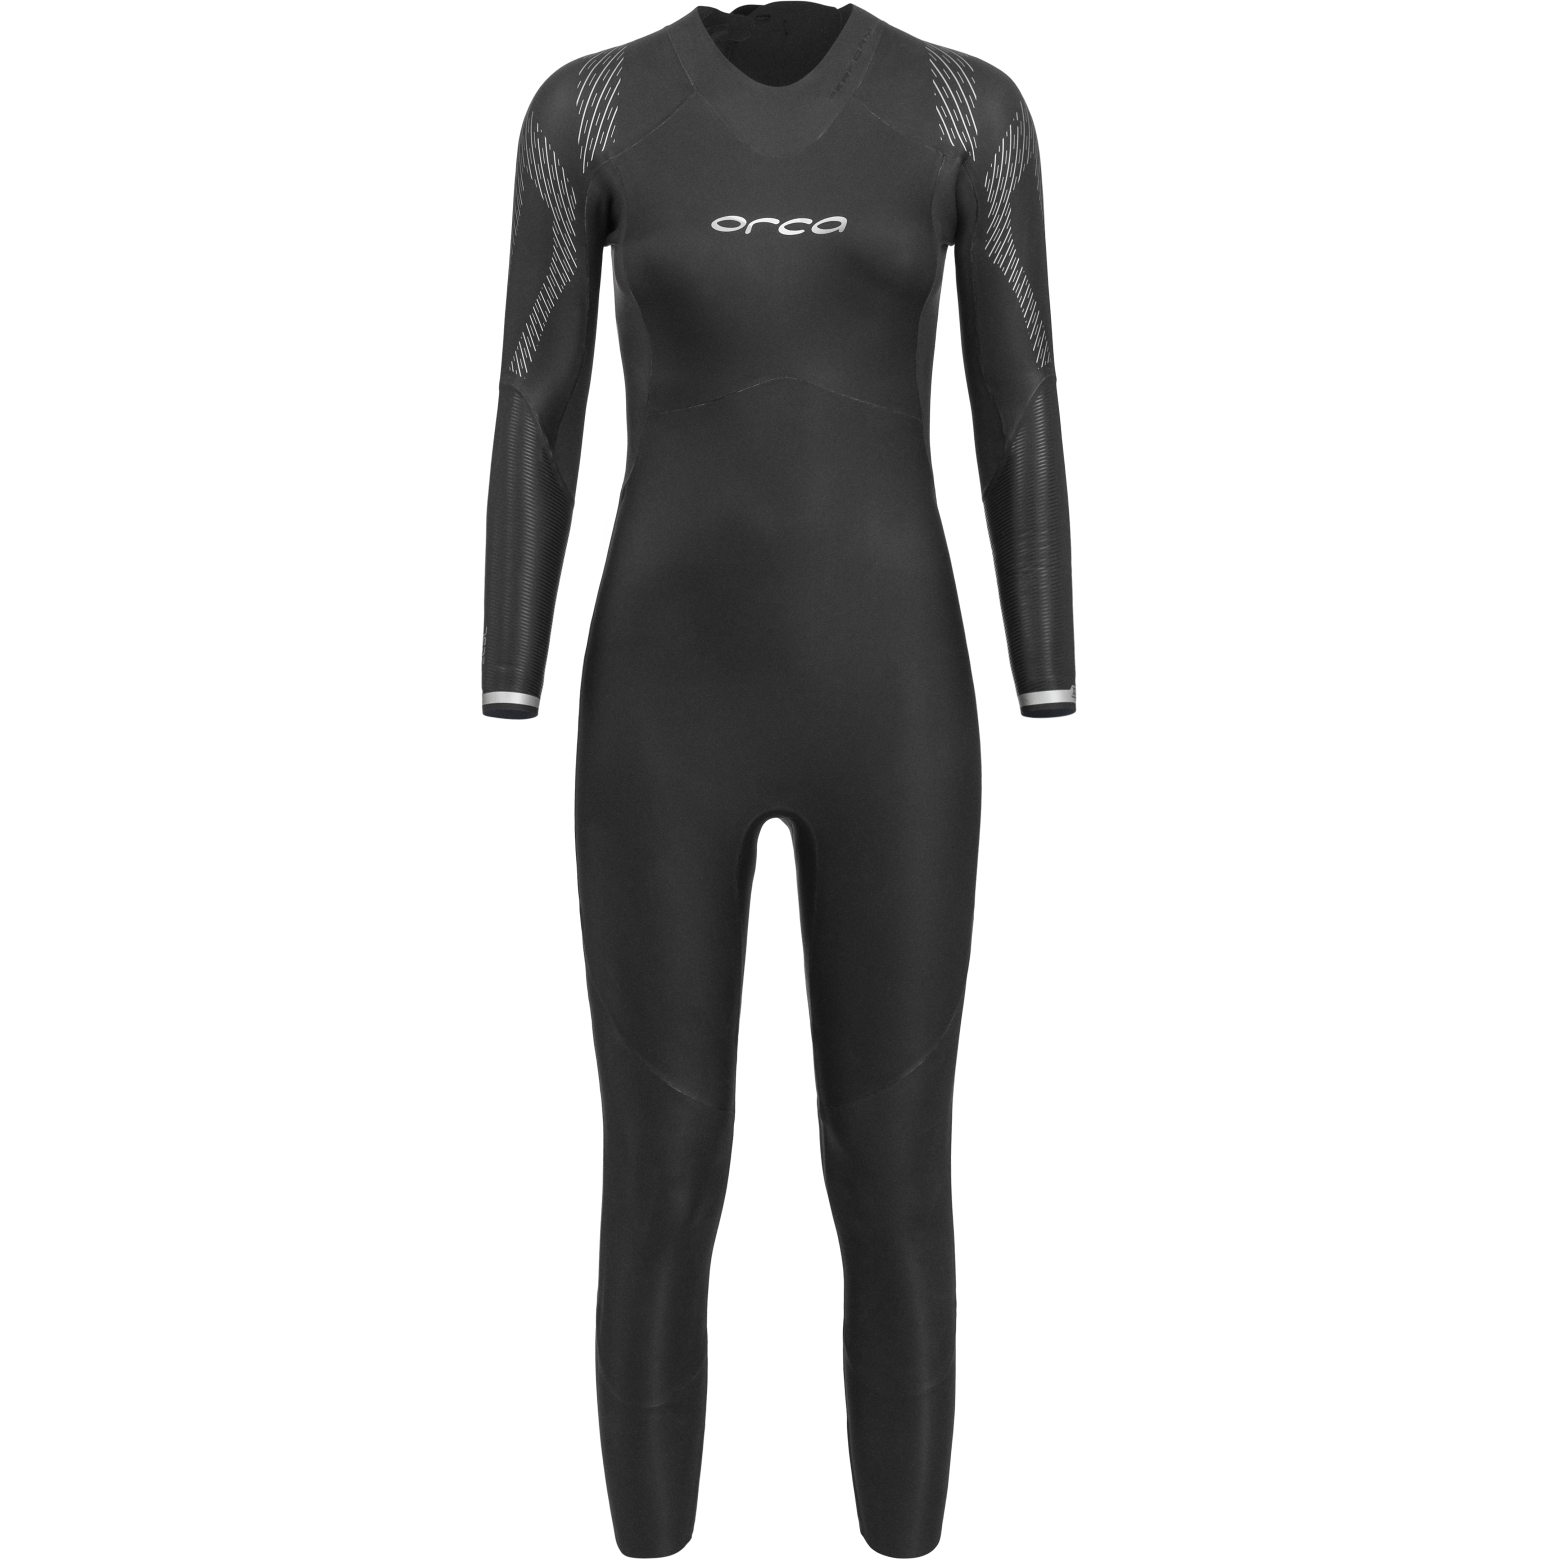 Picture of Orca Openwater Zeal Perform Wetsuit Women - black NN6F